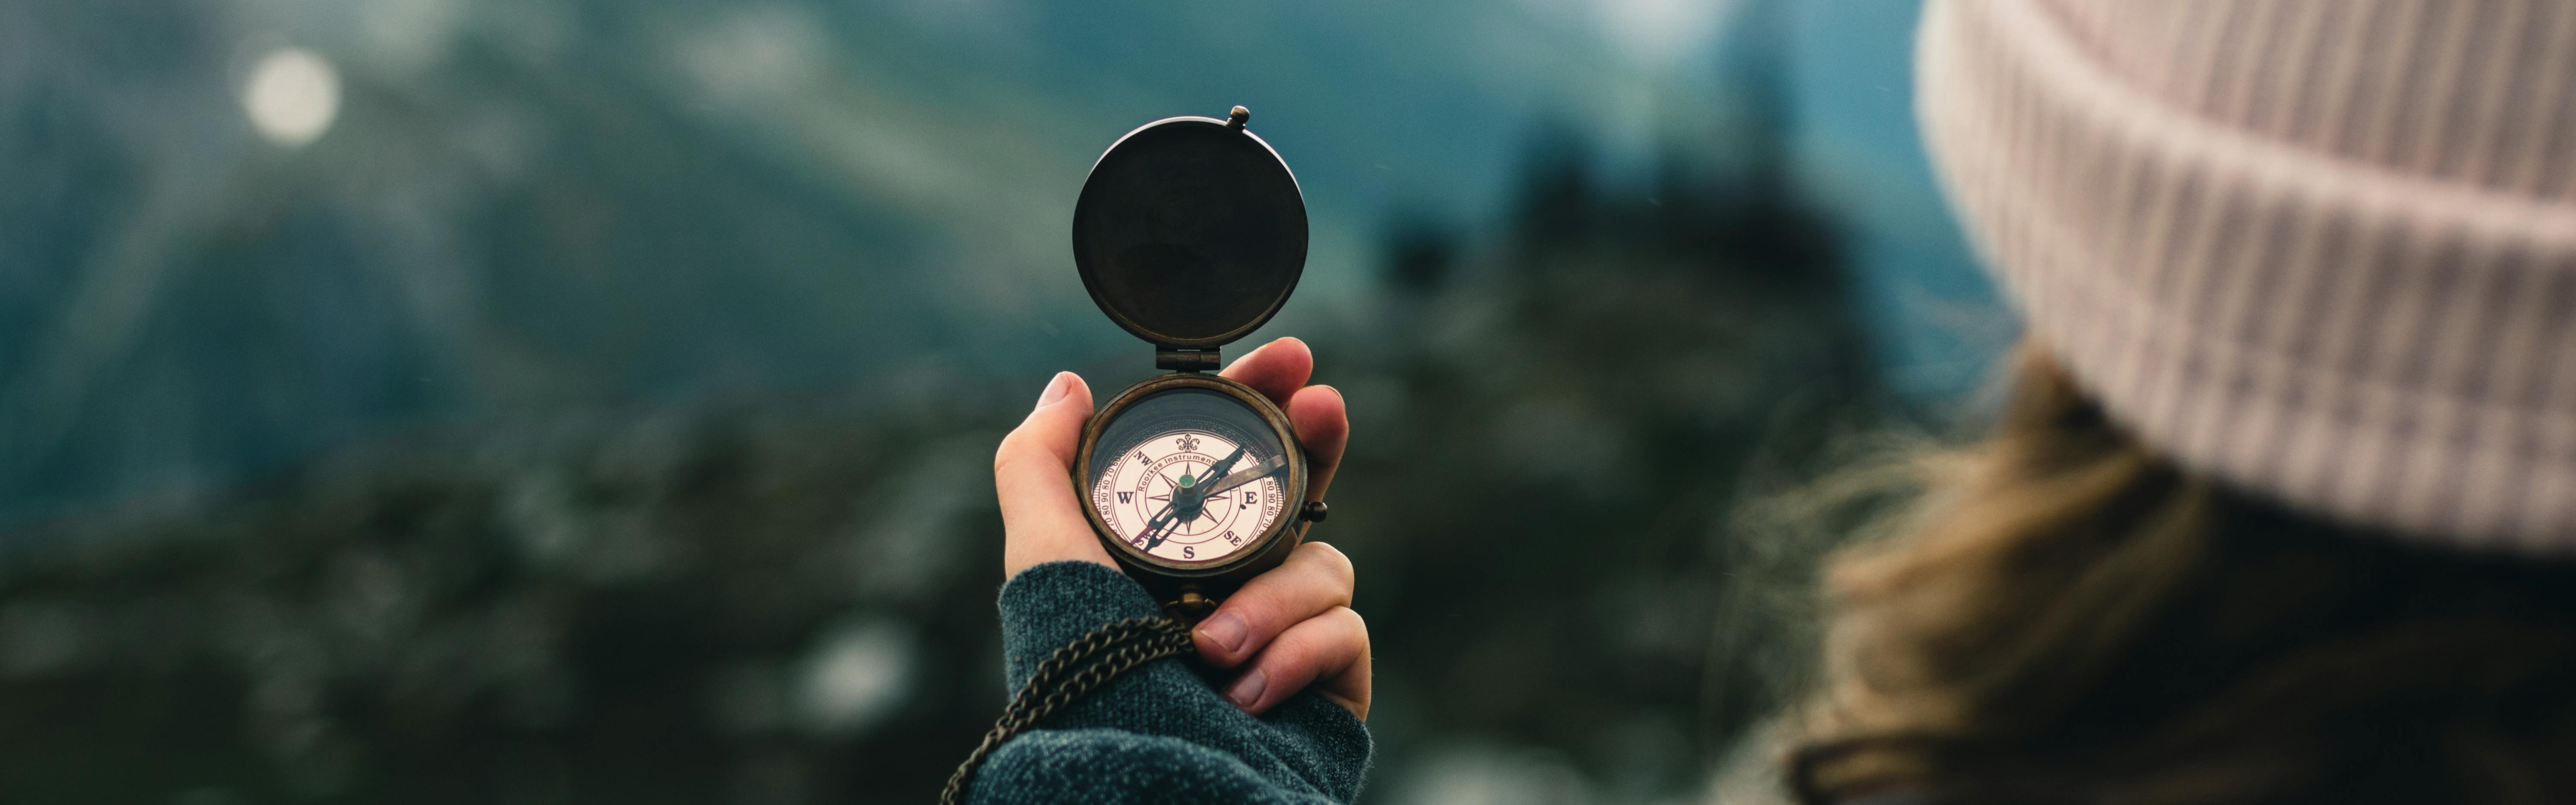 A woman in a beanie holds open a compass in front of a green landscape and we see the image from behind her.  